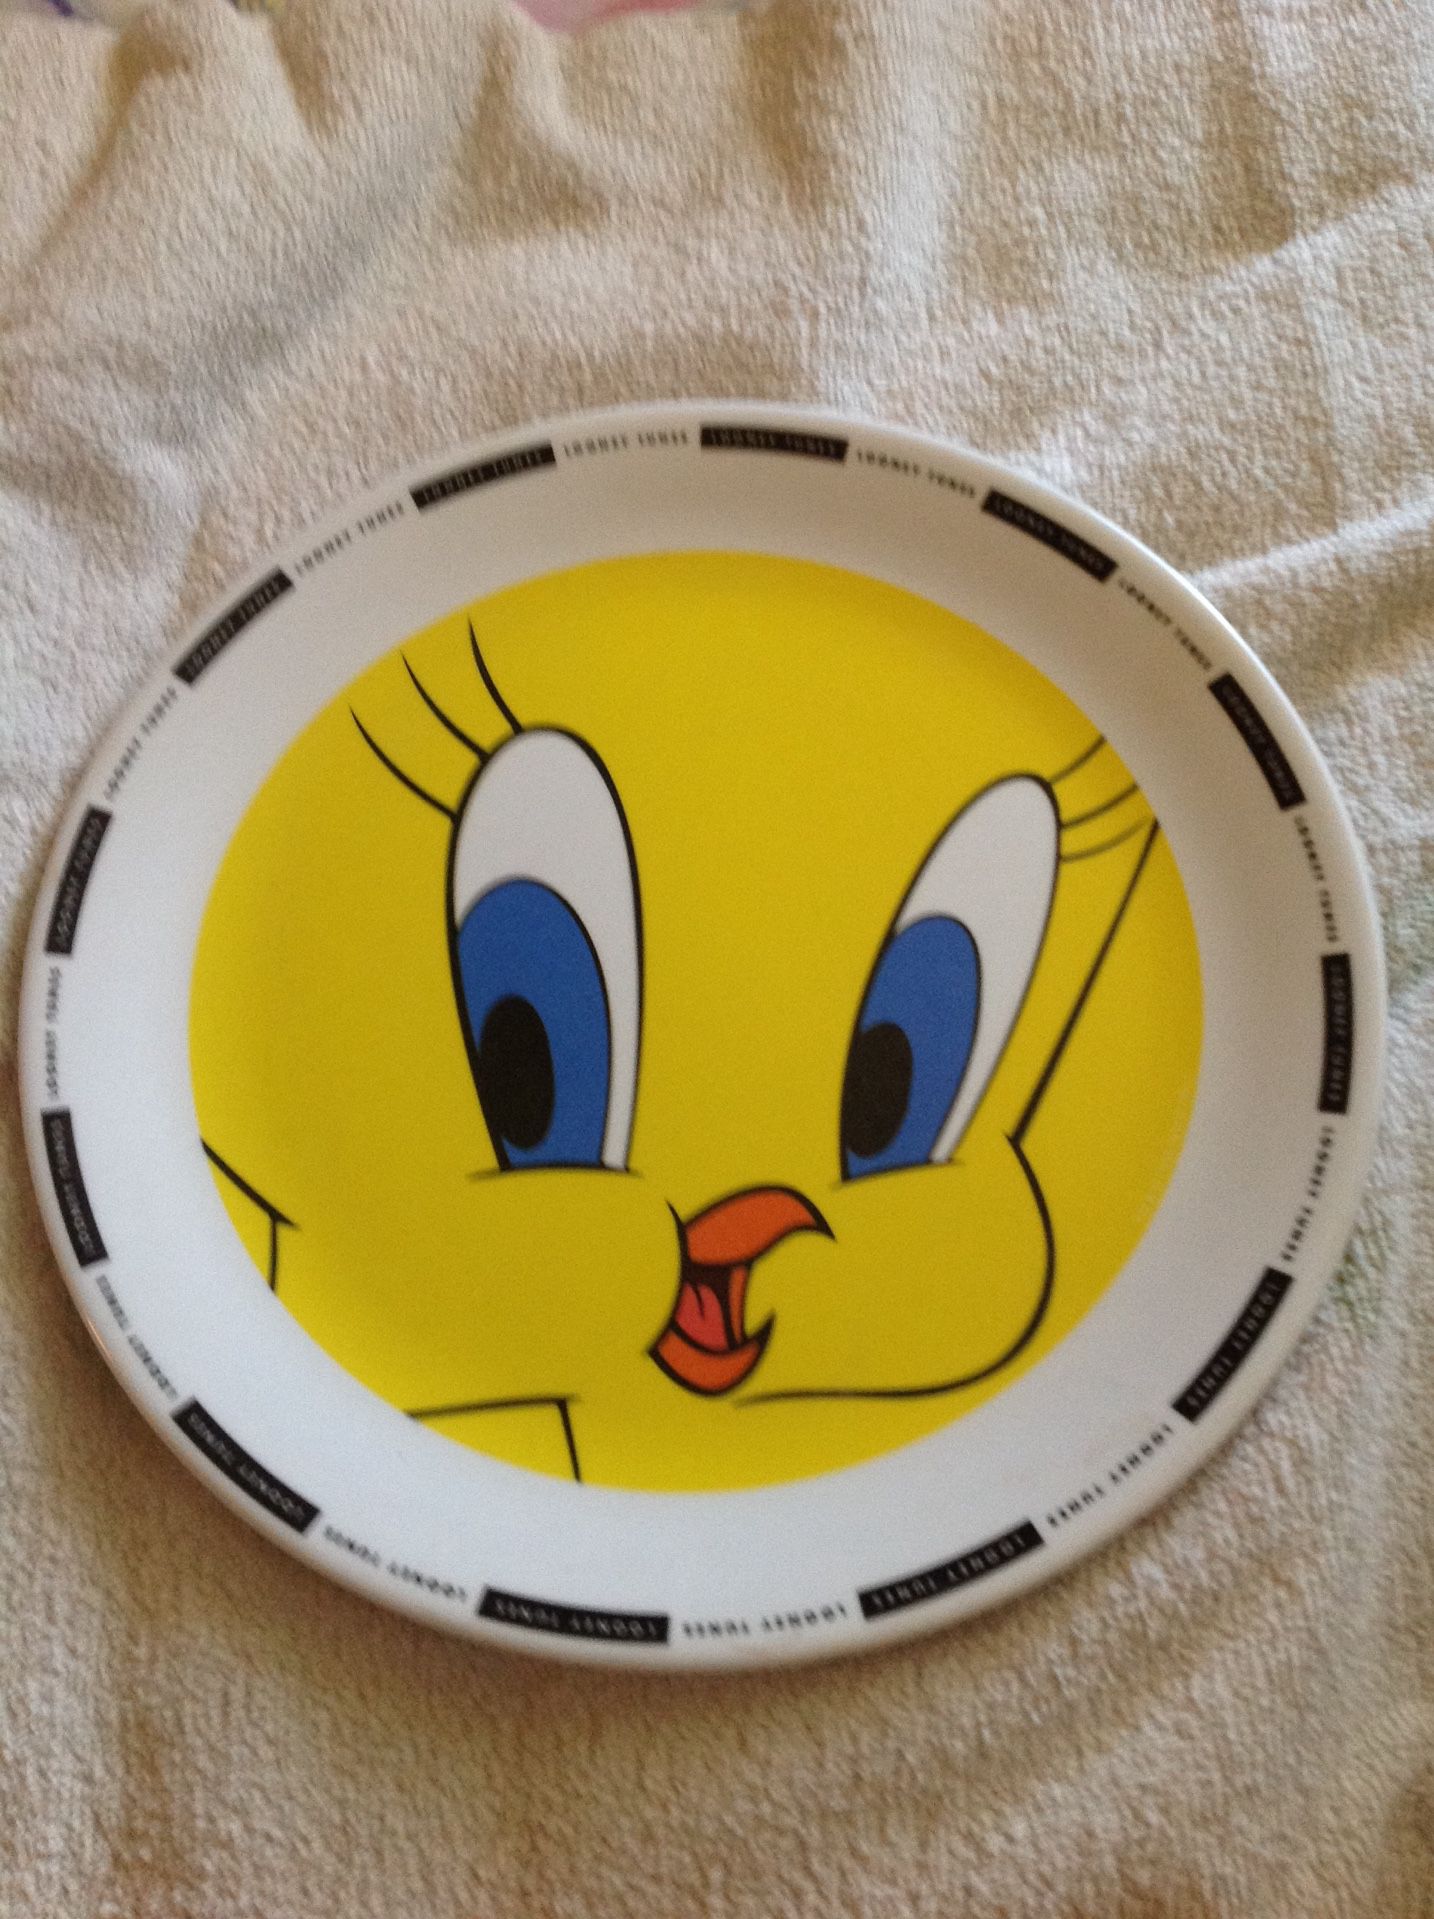 Brand New, Never Used. Looney Tunes Tweety Bird Collectible Plastic Dinner Plate